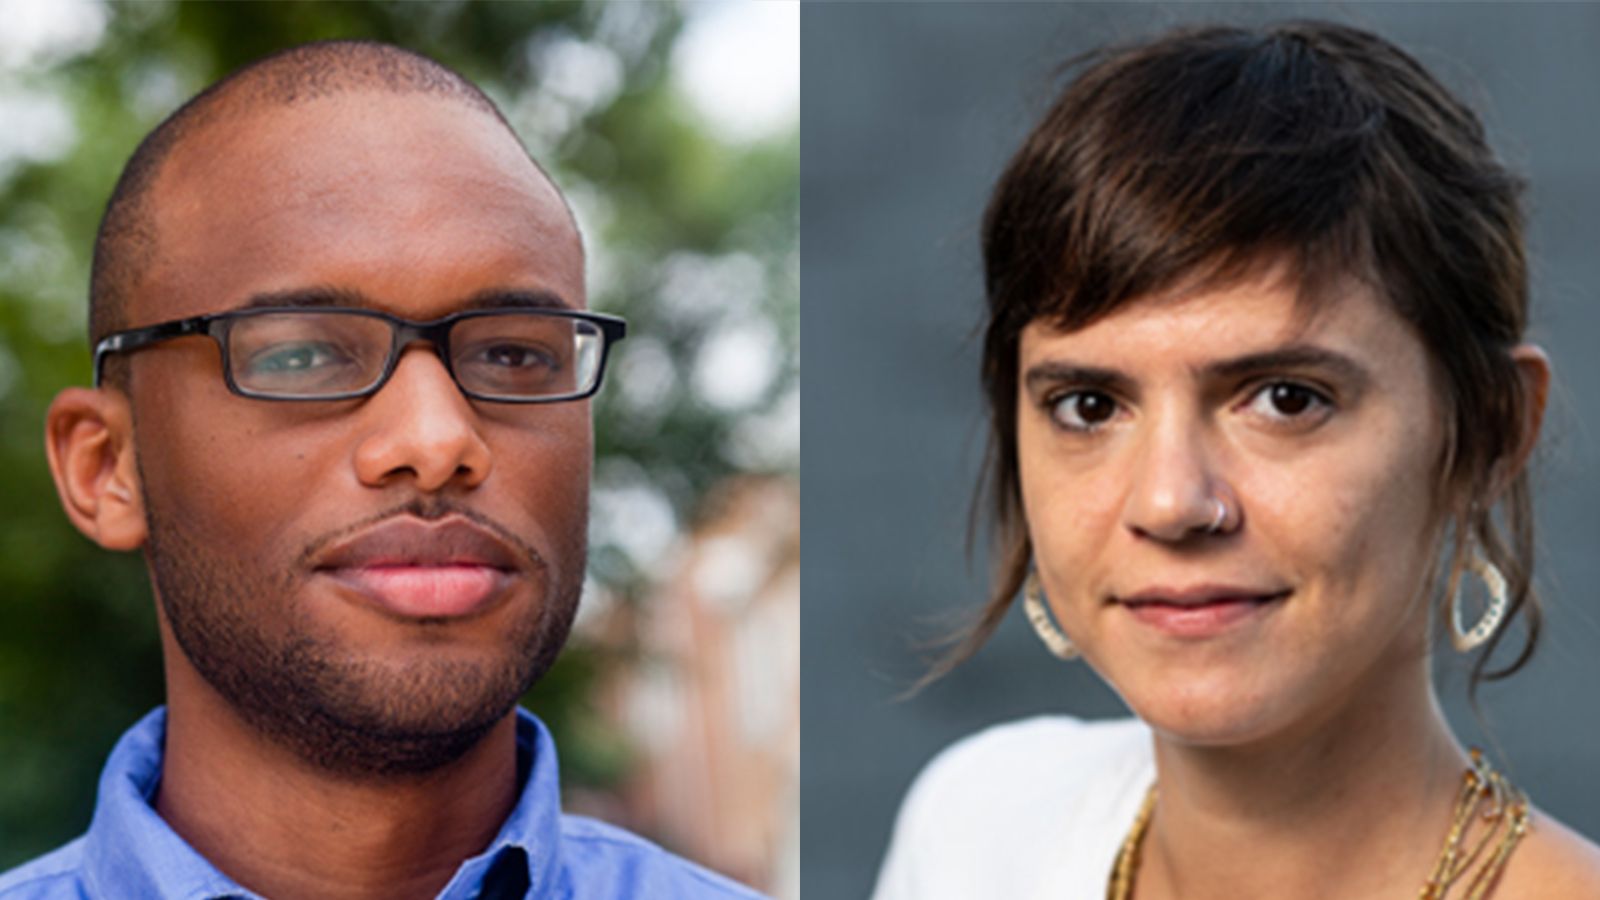 (From left) Mychal Denzel Smith and Valeria Luiselli